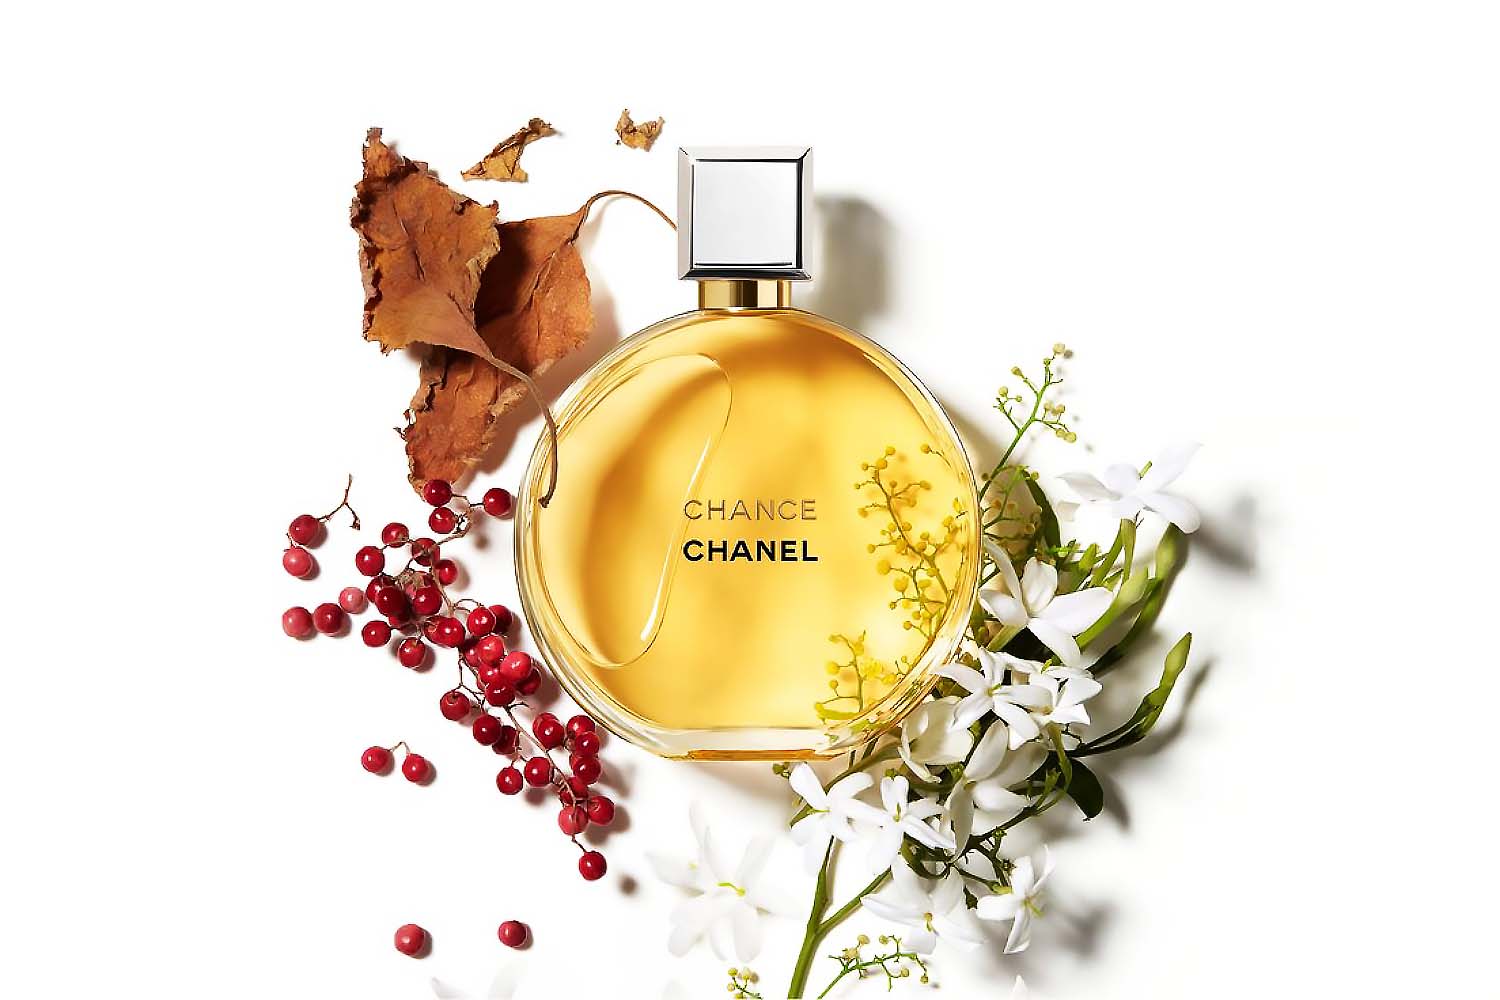 Large Display Chanel Chance Factice Perfume Bottle